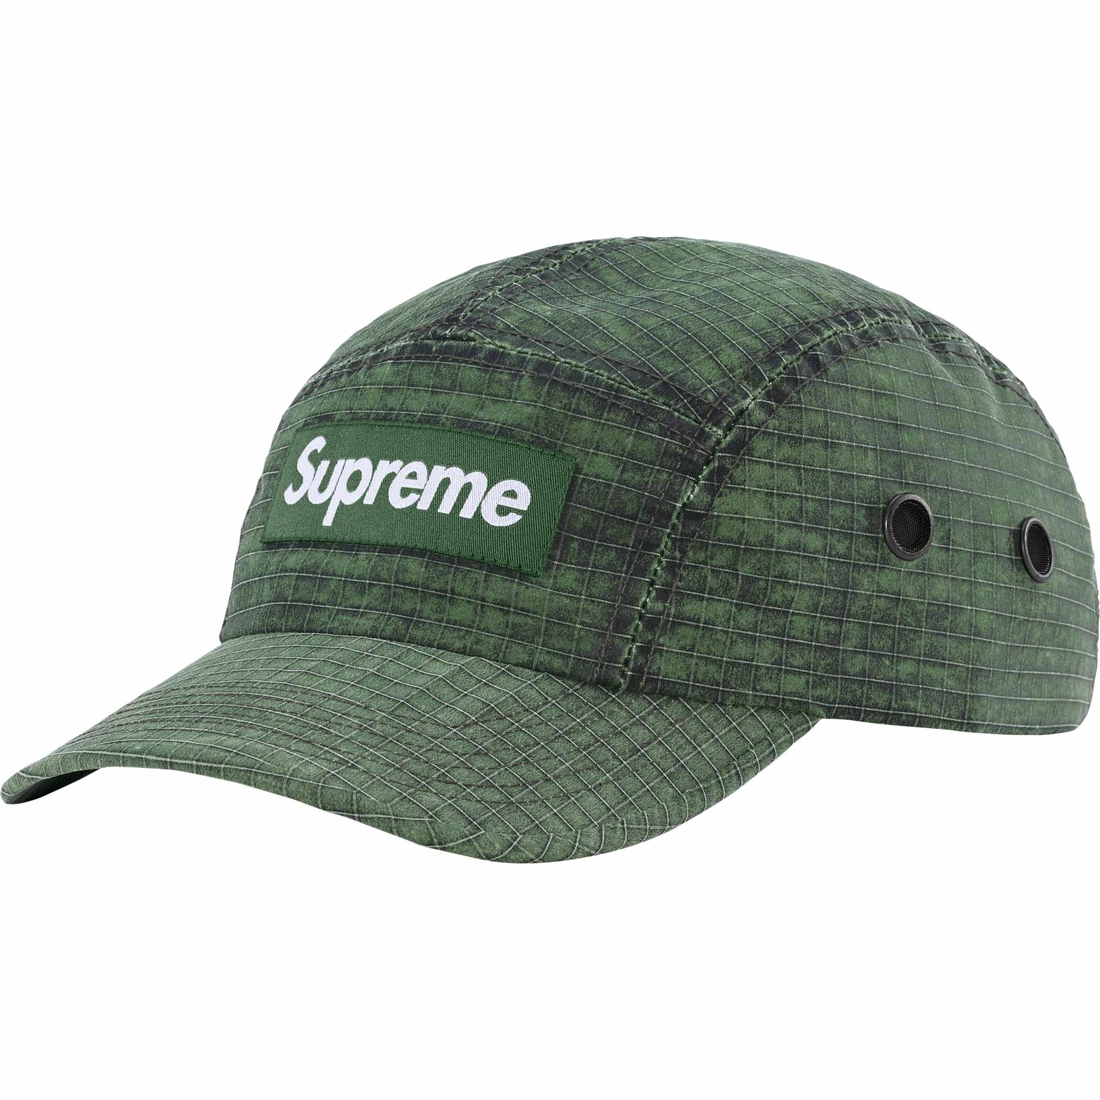 Details on Distressed Ripstop Camp Cap Green from fall winter
                                                    2023 (Price is $58)